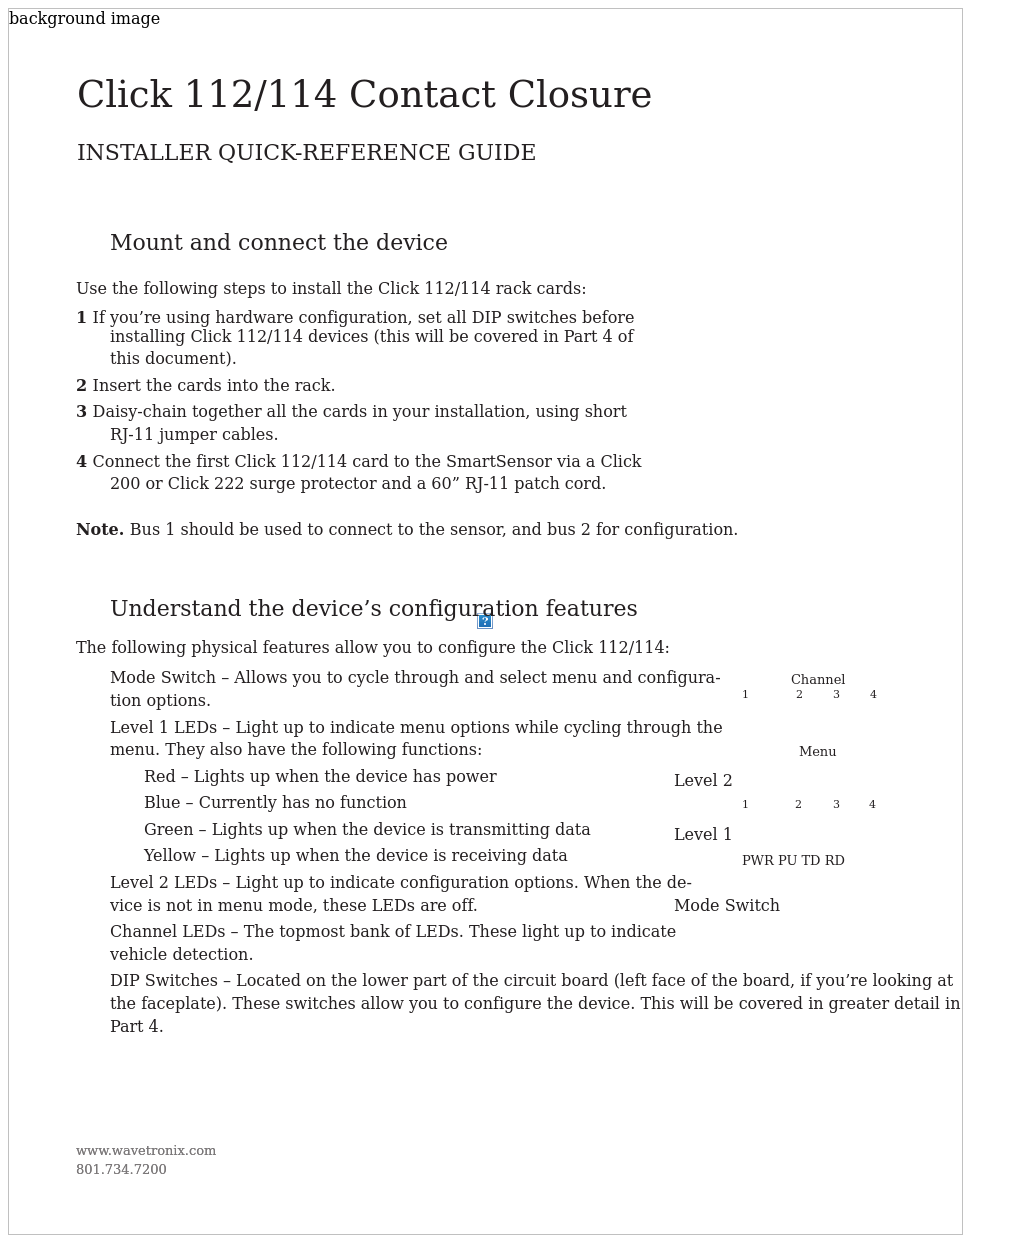 Click 114 (detector rack card) (CLK-114) - Quick-reference Guide